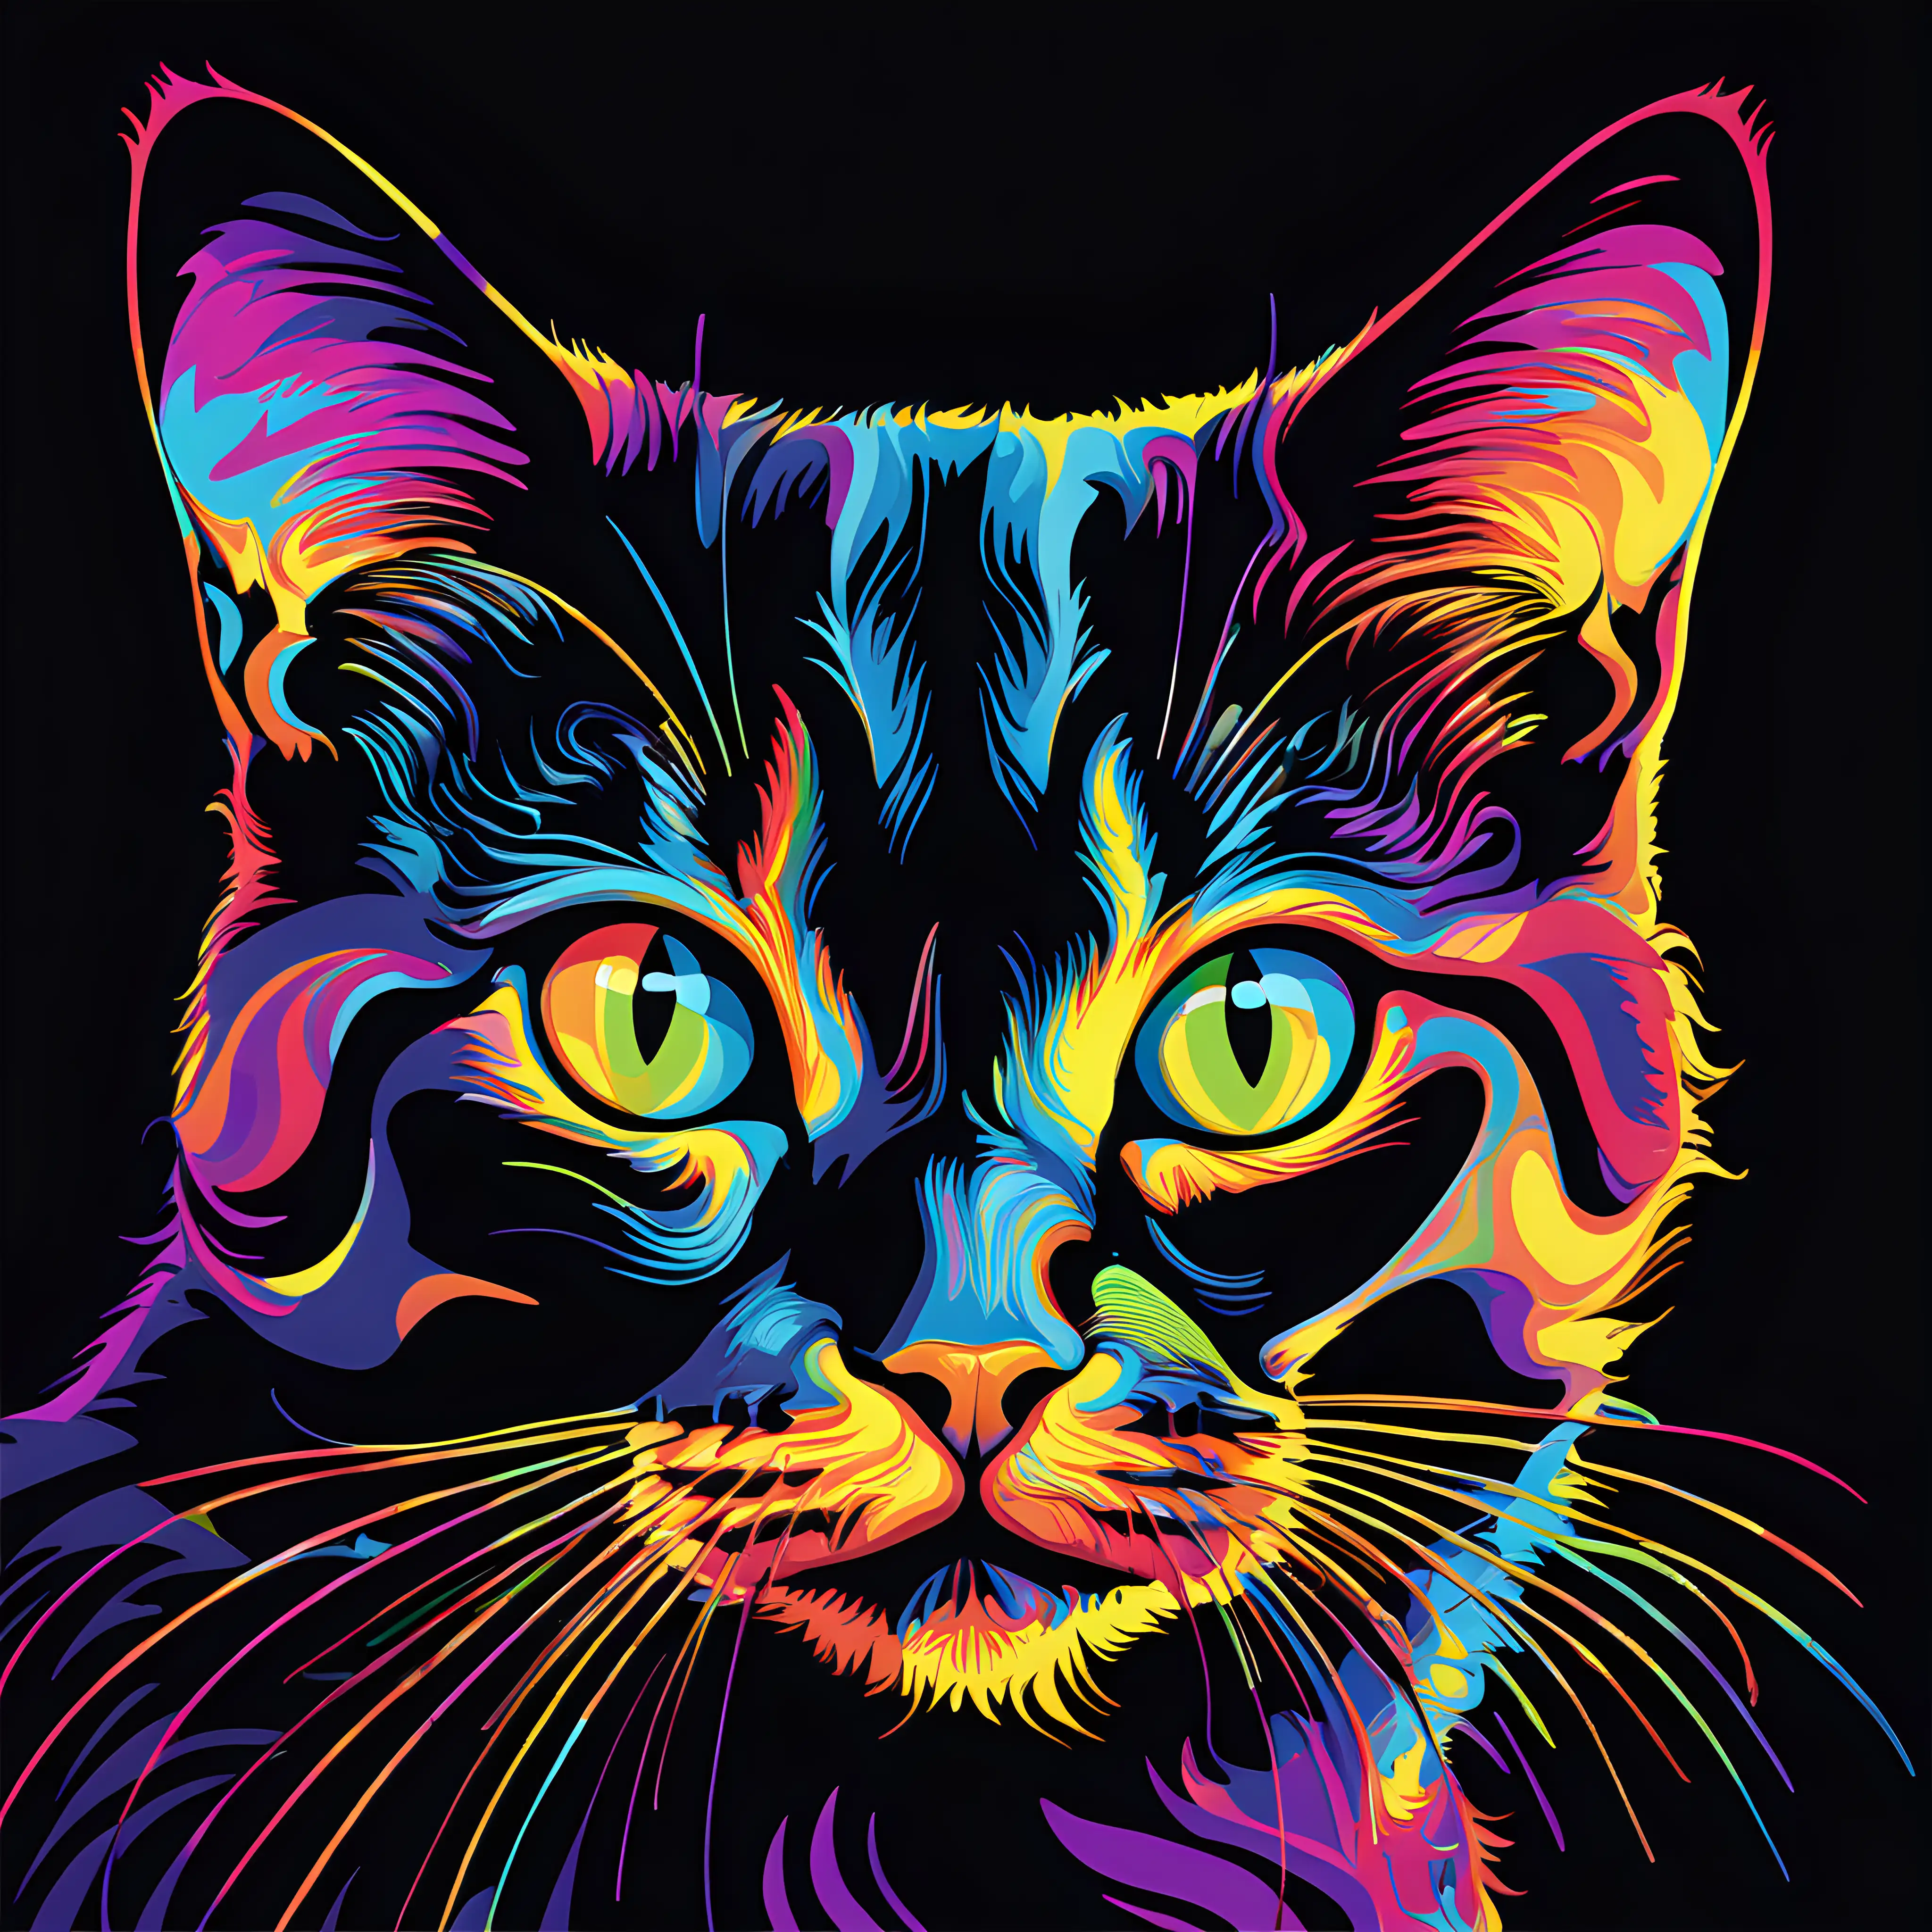 Psychedelic Multicolored Black Cat on Black Background